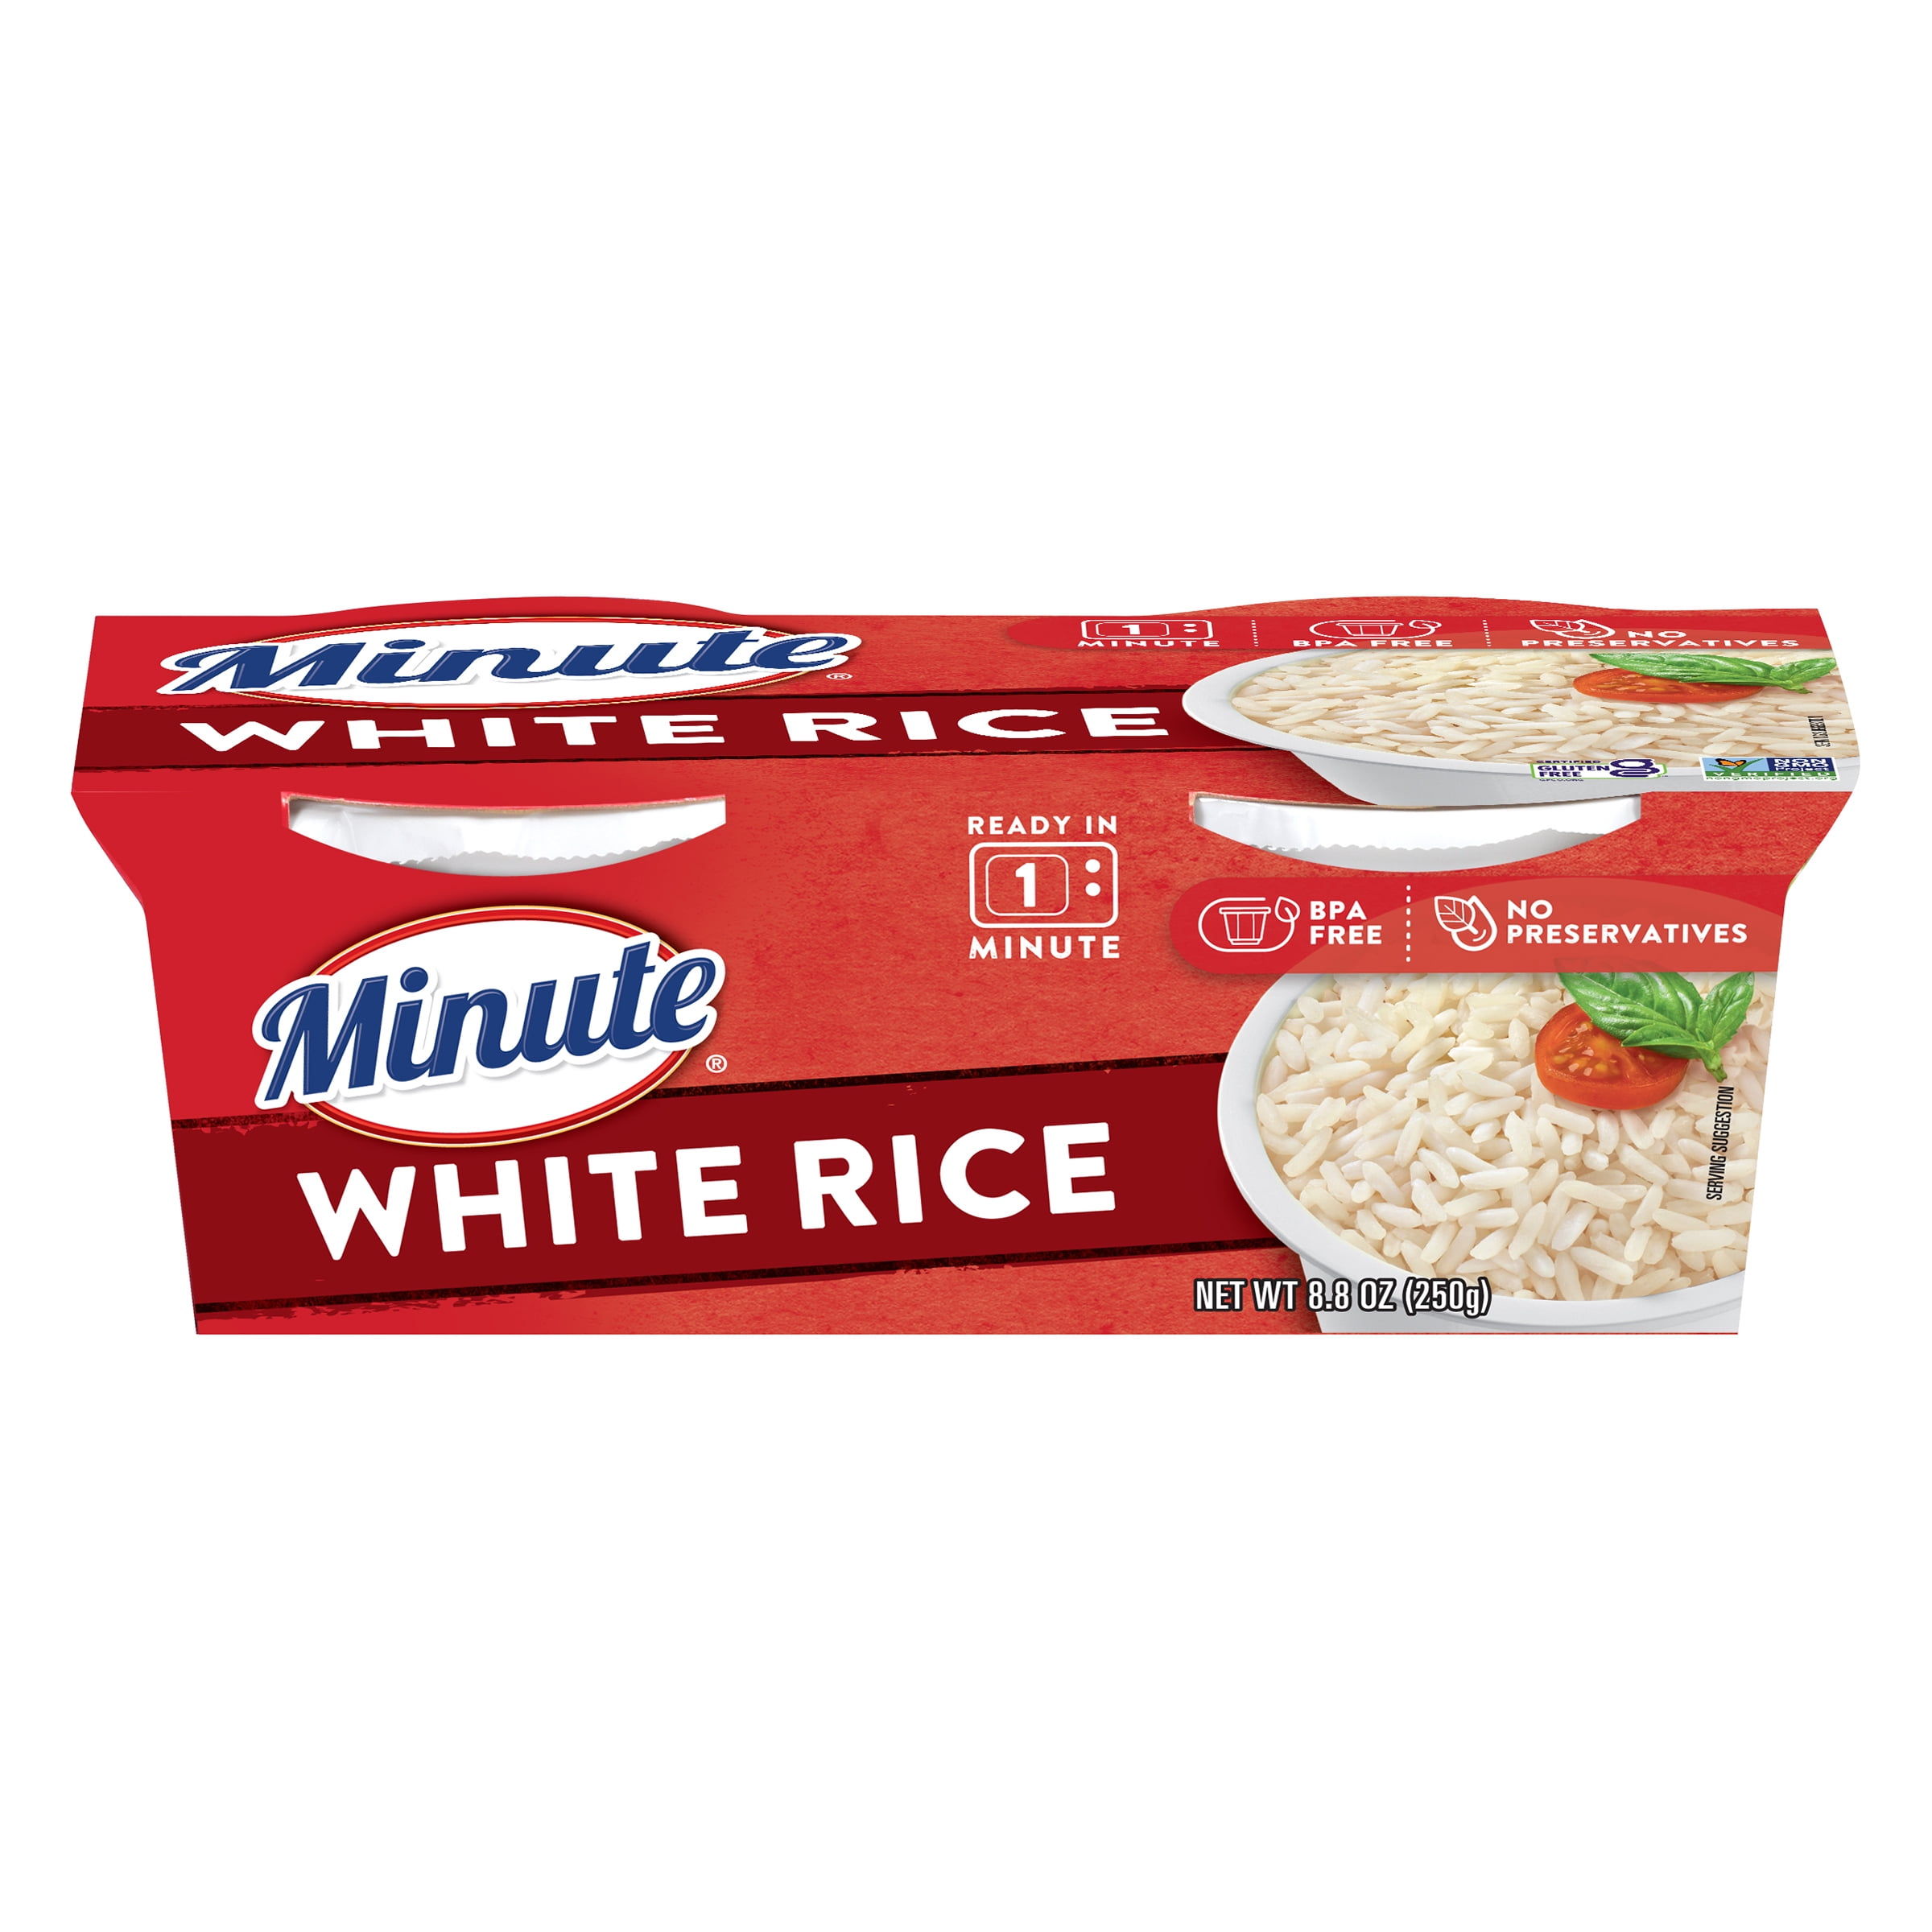 Minute Ready to Serve White Rice, Quick and Easy Cups, 4.4 oz, 2 Ct